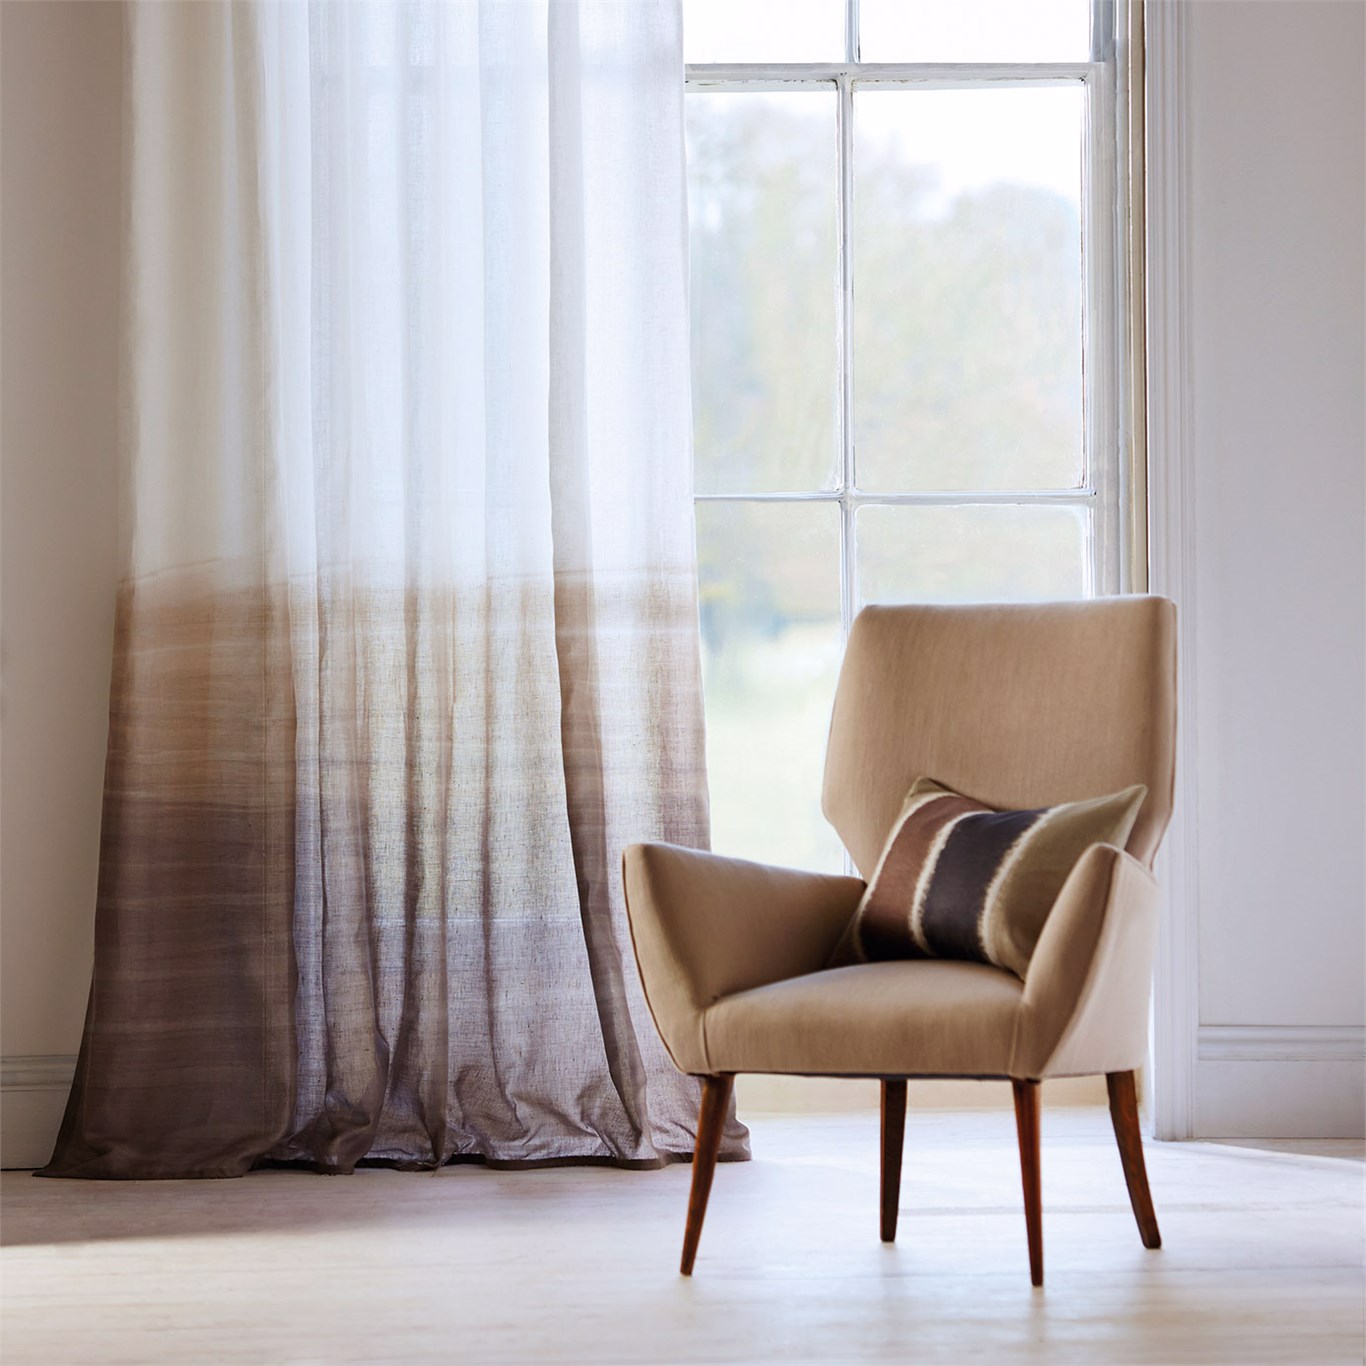 Tranquil Pebble/Hessian Fabric by HAR